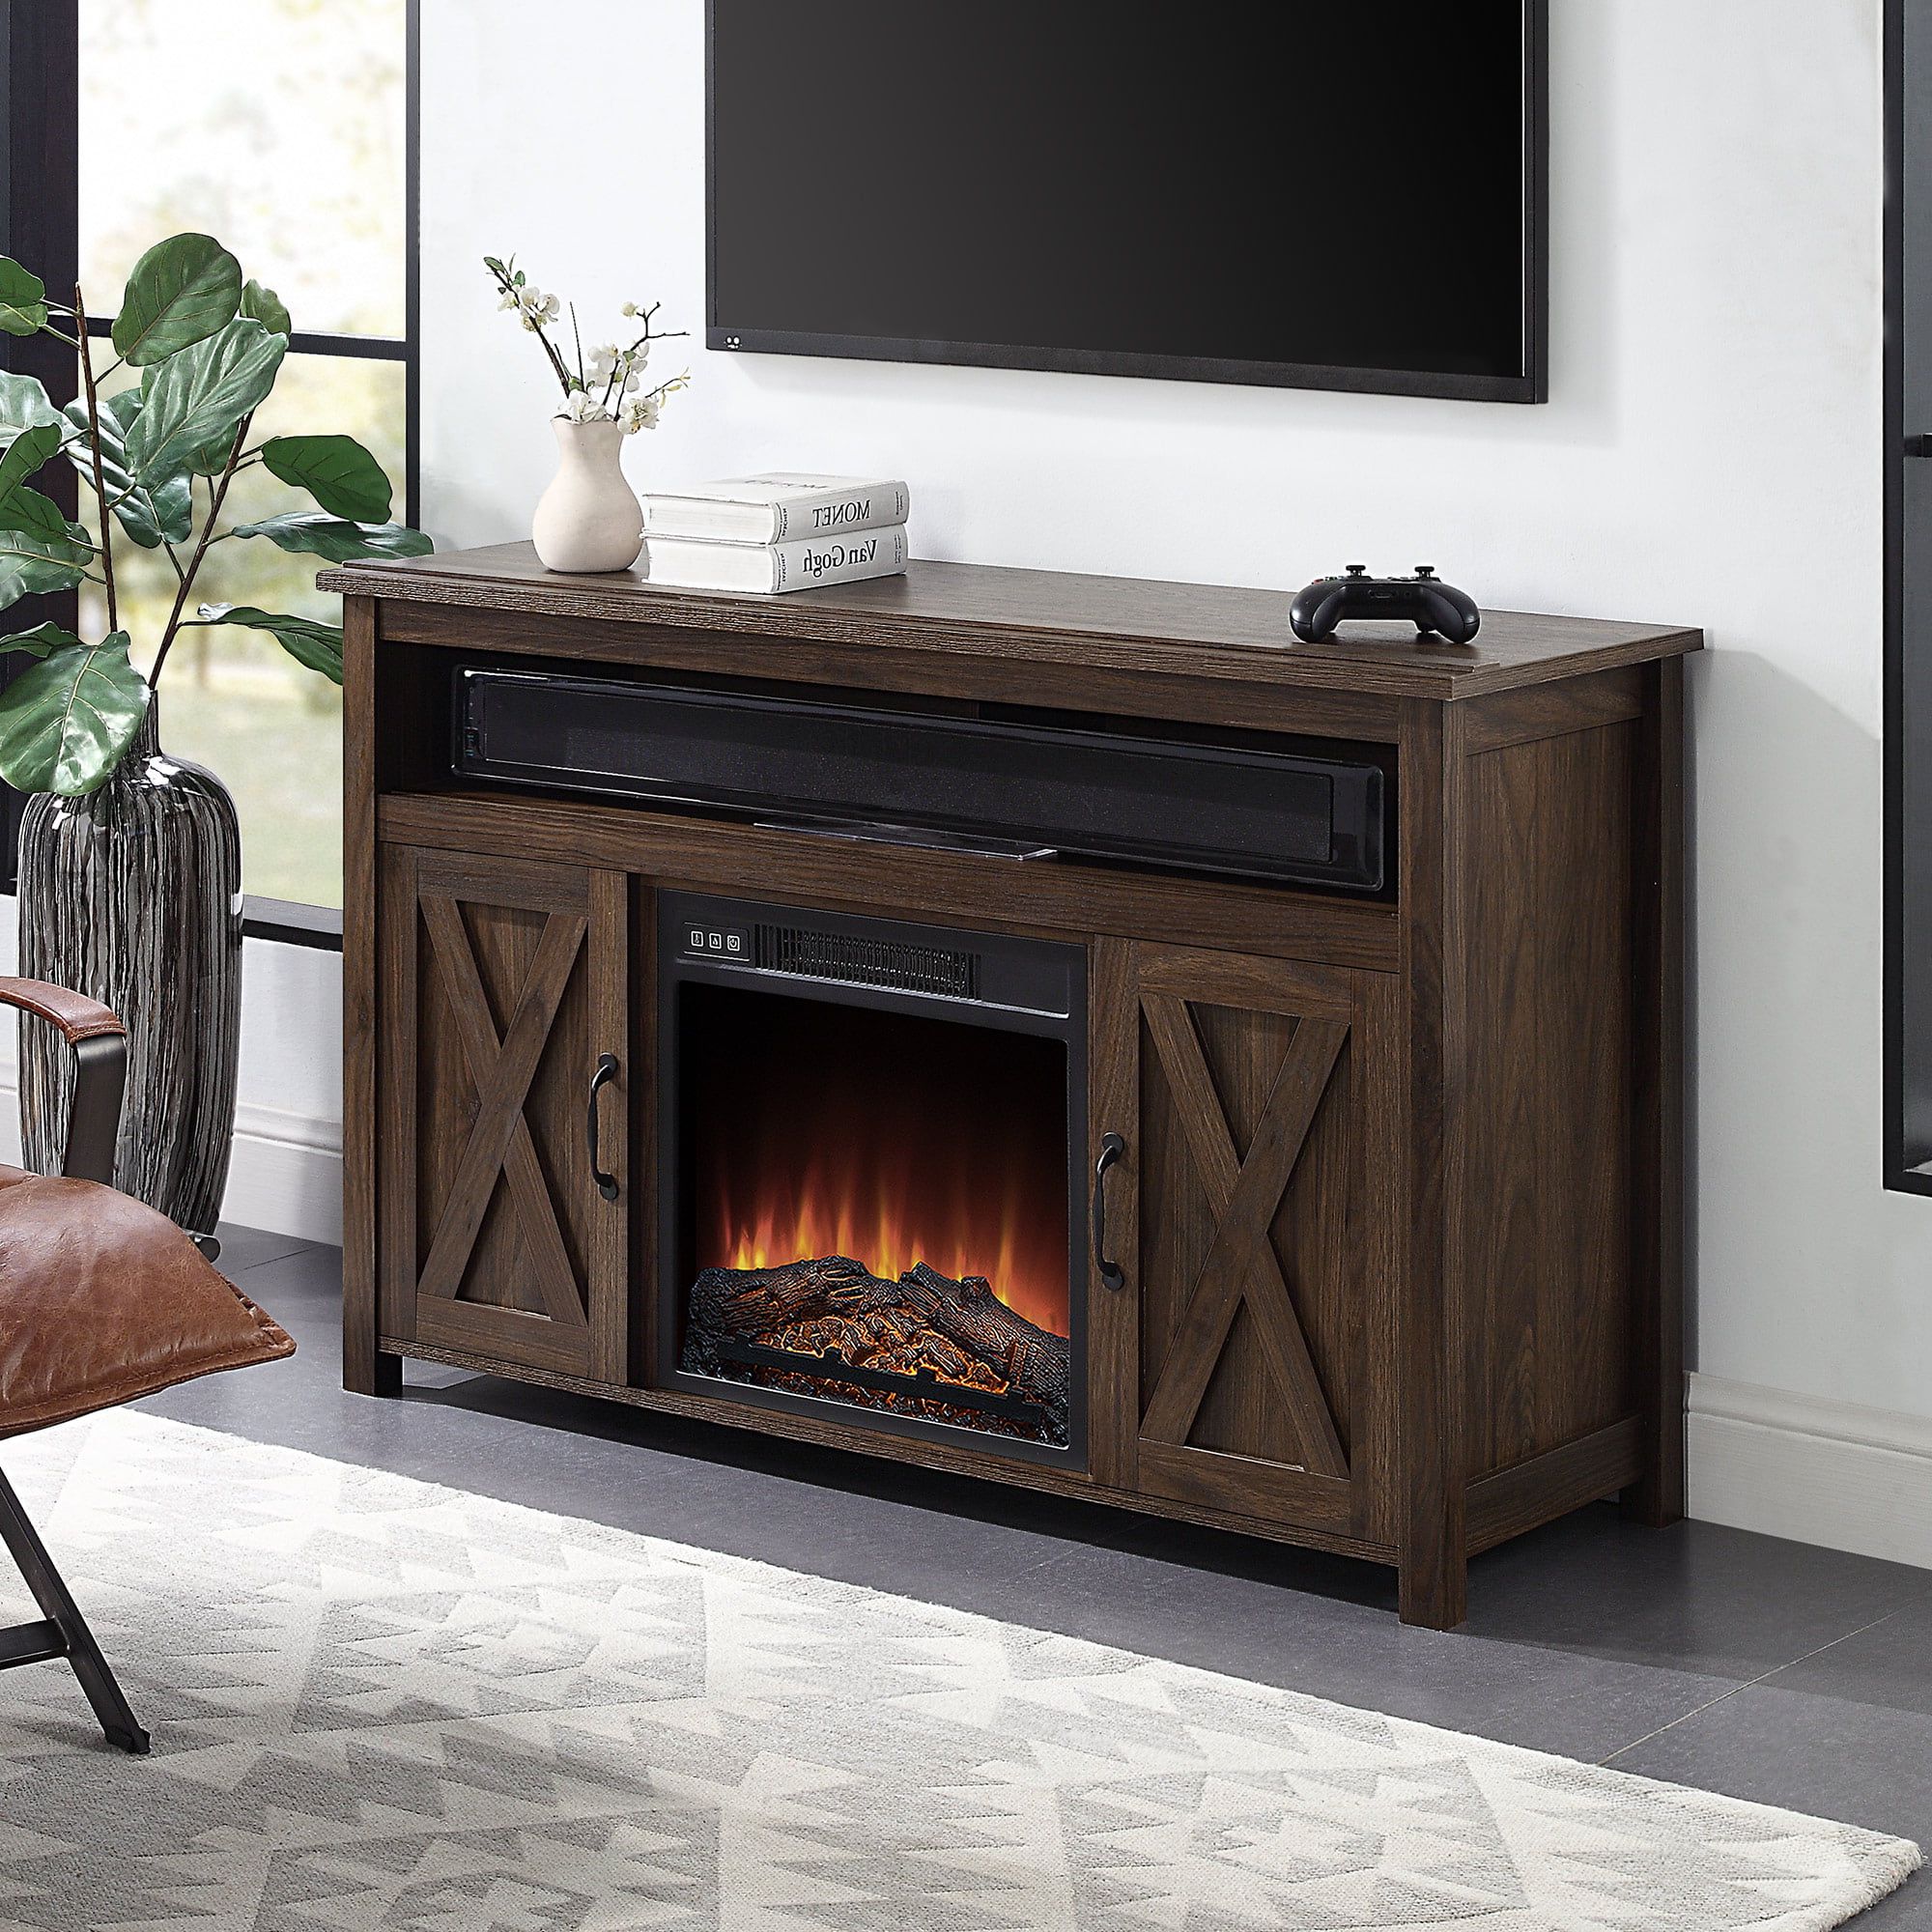 Newest Belleze Tv Stand Console Electric Fireplace With Remote Control, 48" Or With Regard To Tv Stands With Electric Fireplace (View 10 of 15)